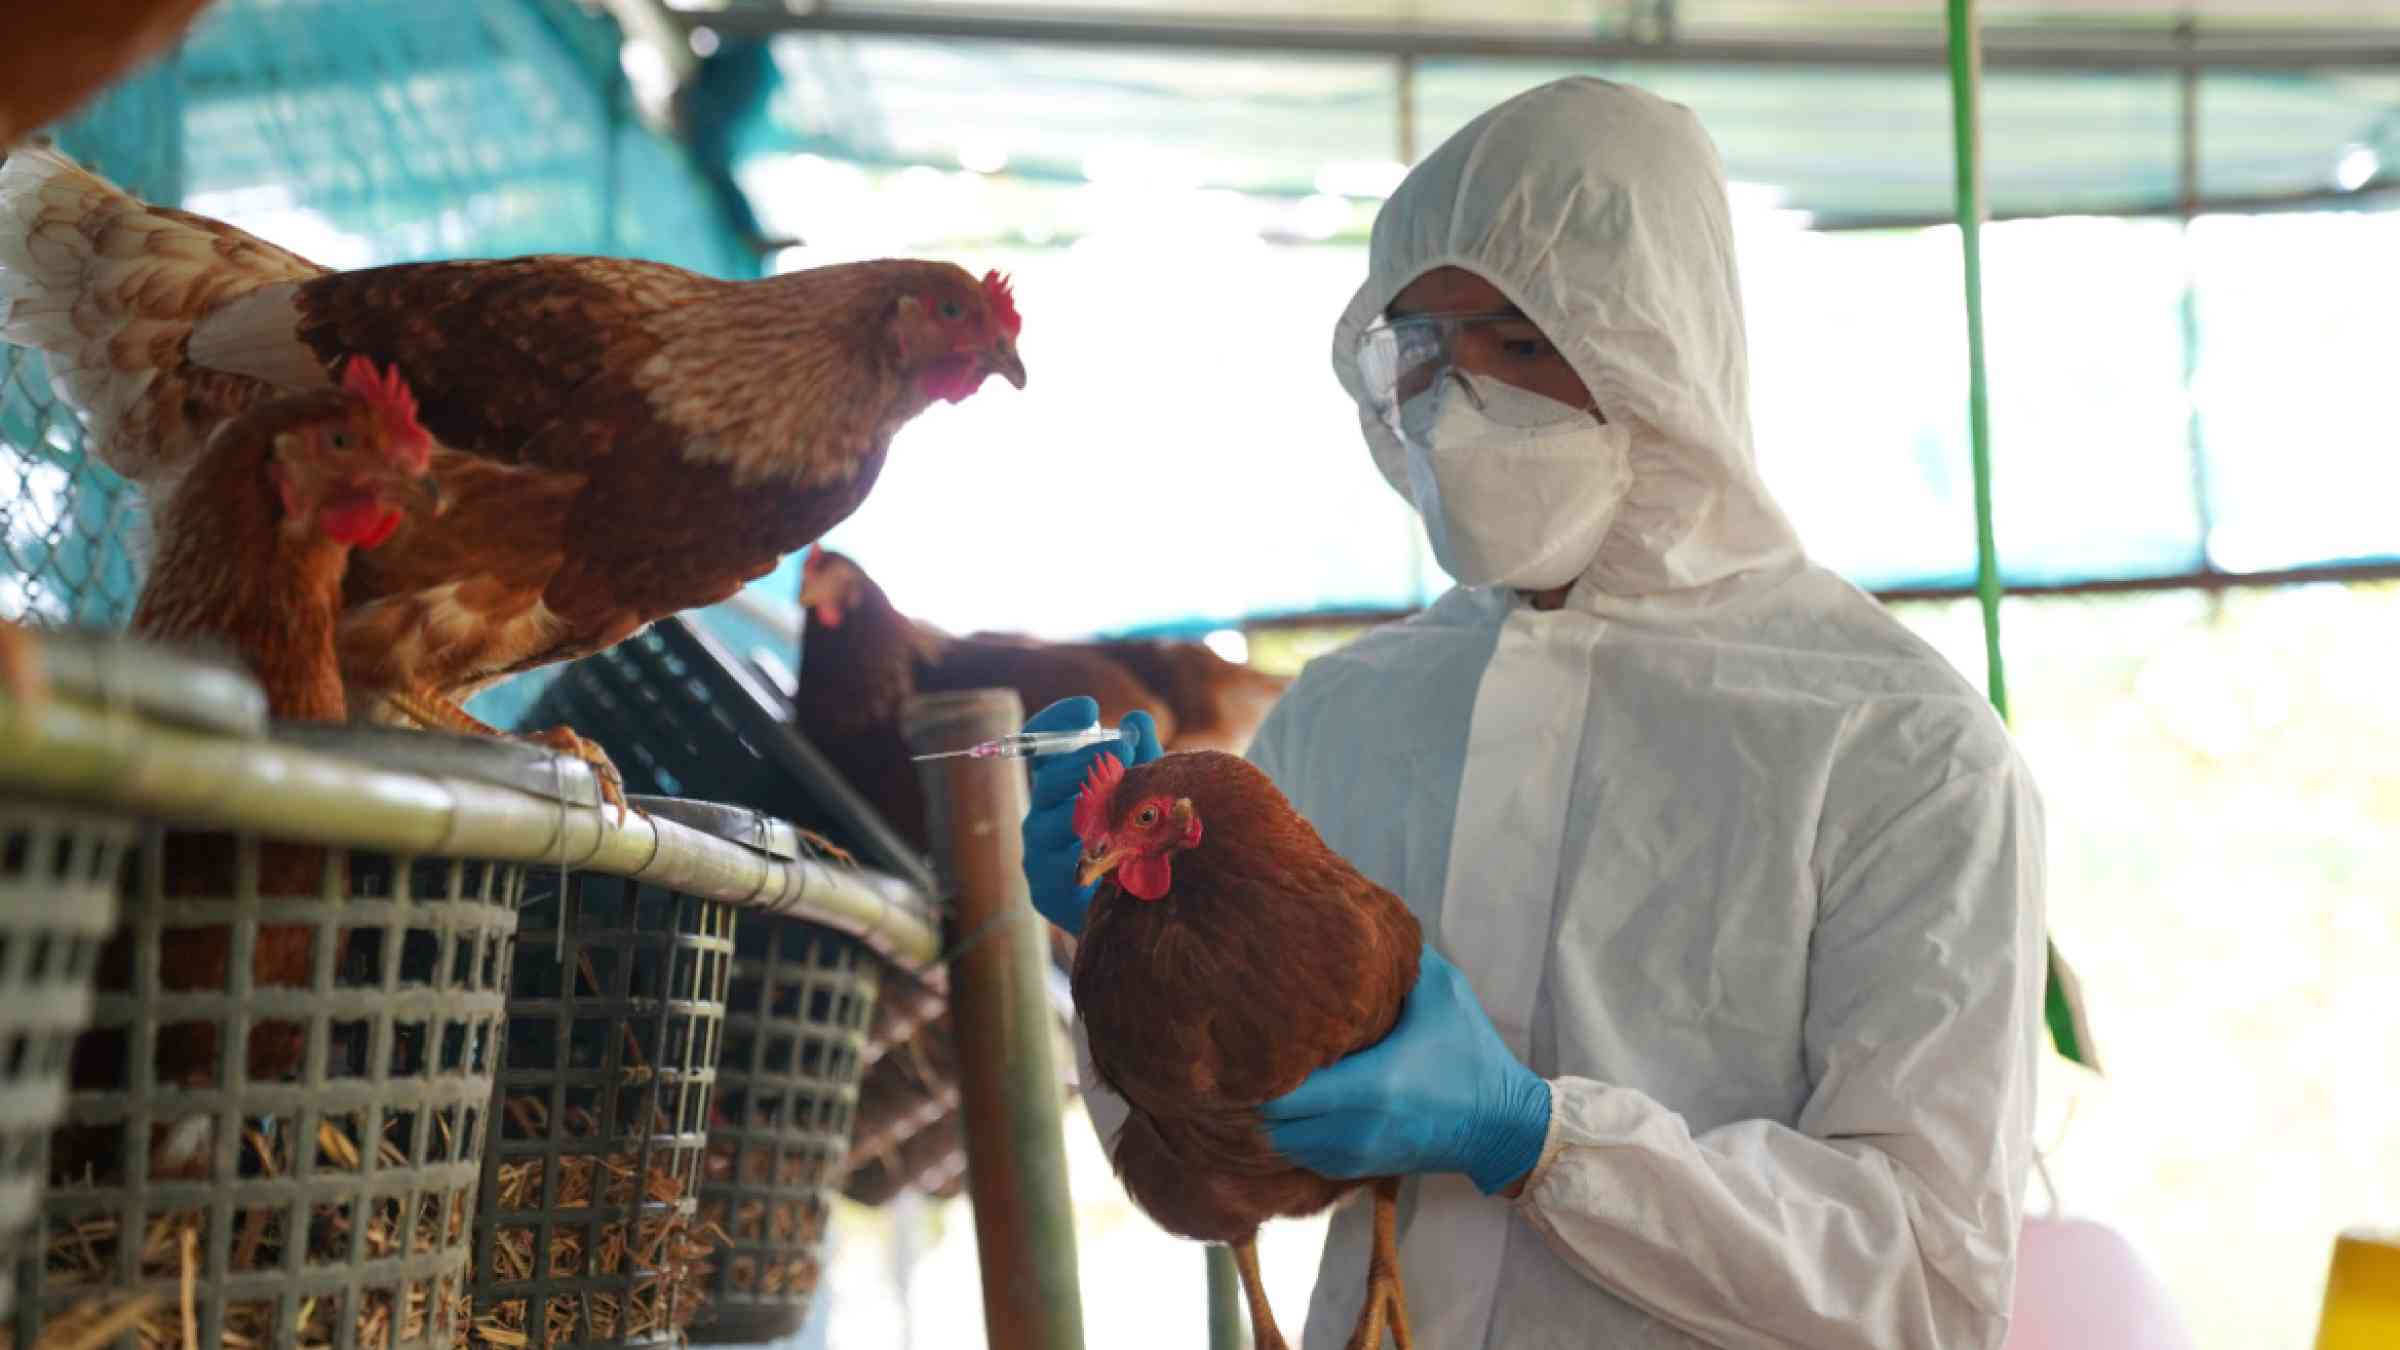 Avian flu, veterinarians vaccinate against diseases in poultry such as chickens on farms, 